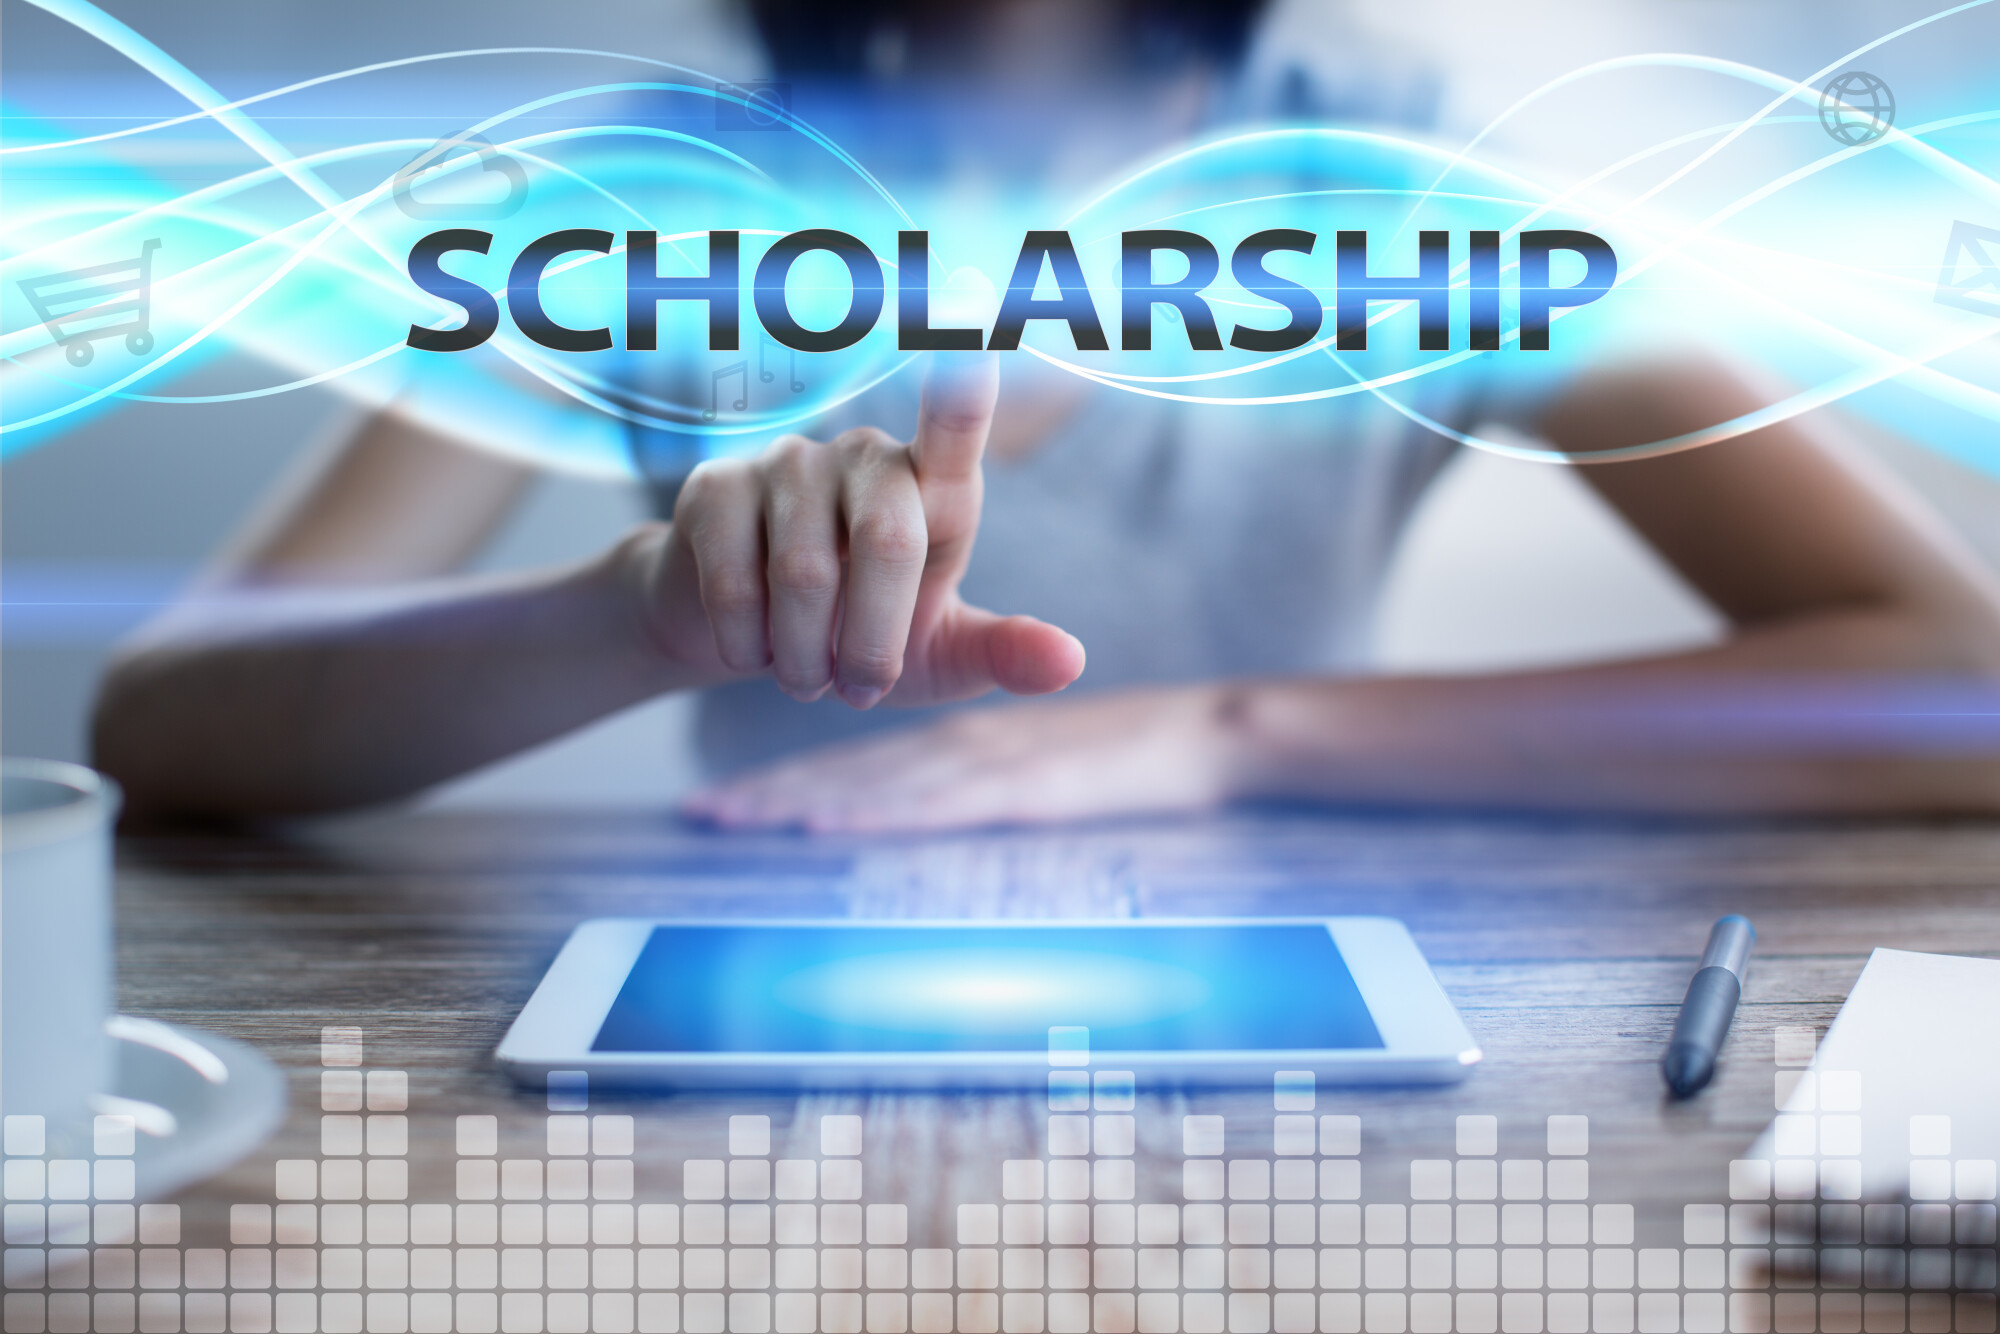 College can be really expensive, but scholarships can pay for some or all of the costs. Learn how to find scholarships for college tuition here.